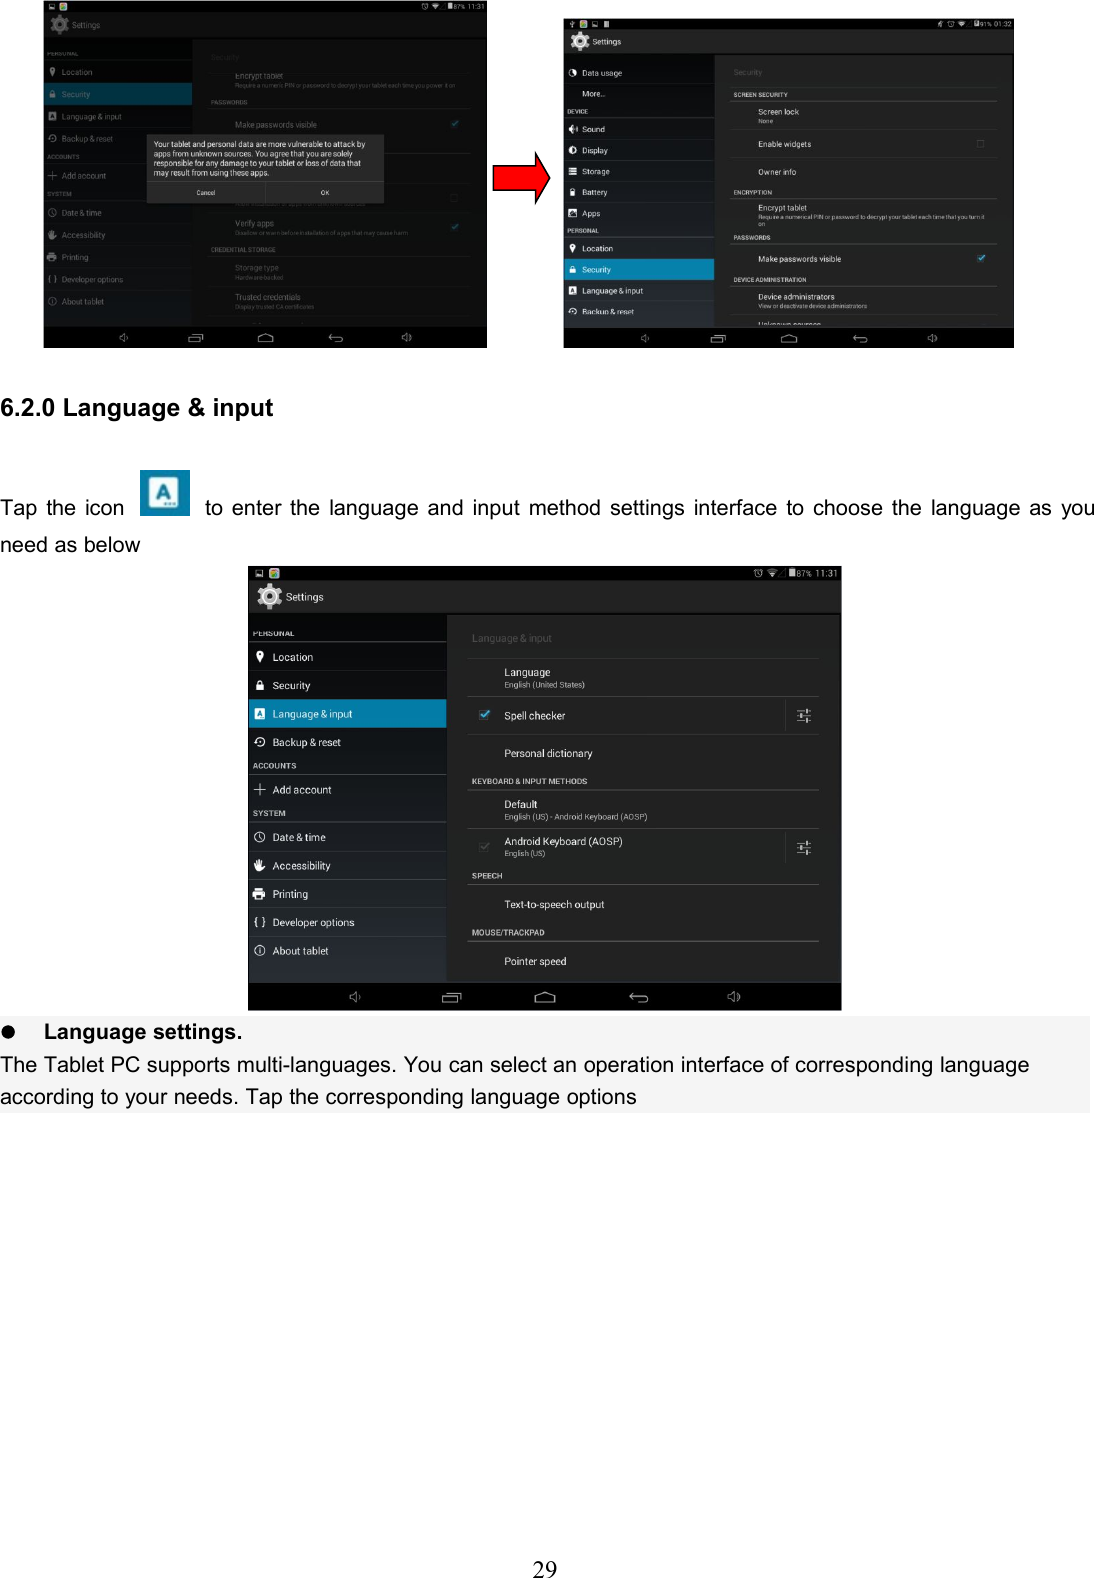 296.2.0 Language &amp; inputTap the icon to enter the language and input method settings interface to choose the language as youneed as belowLanguage settings.The Tablet PC supports multi-languages. You can select an operation interface of corresponding languageaccording to your needs. Tap the corresponding language options